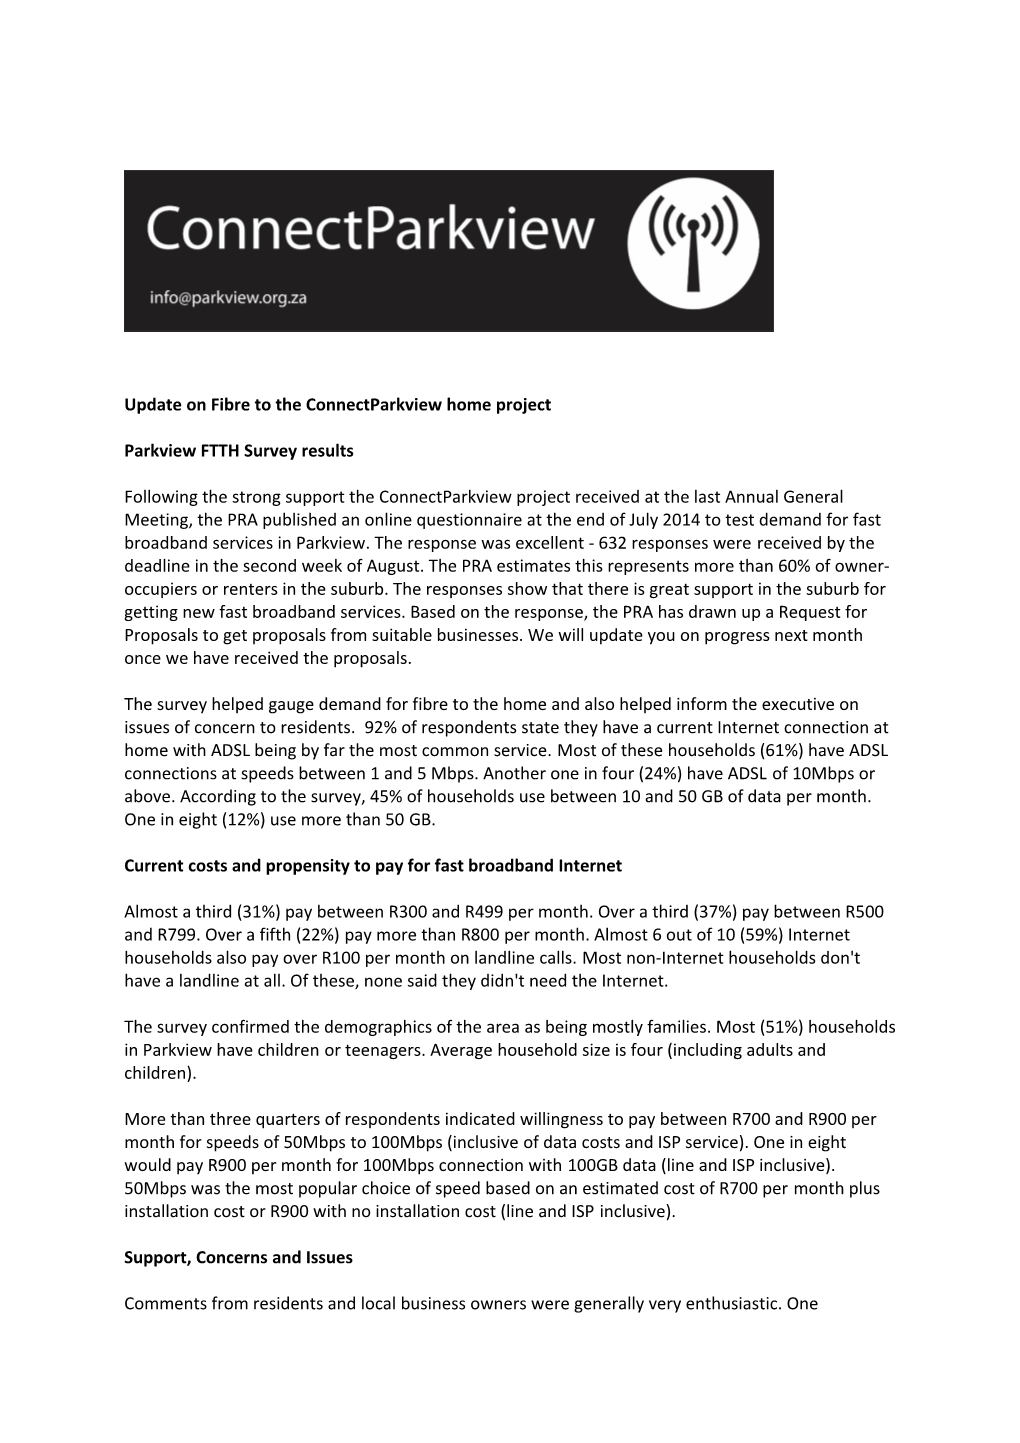 Update on Fibre to the Connectparkview Home Project